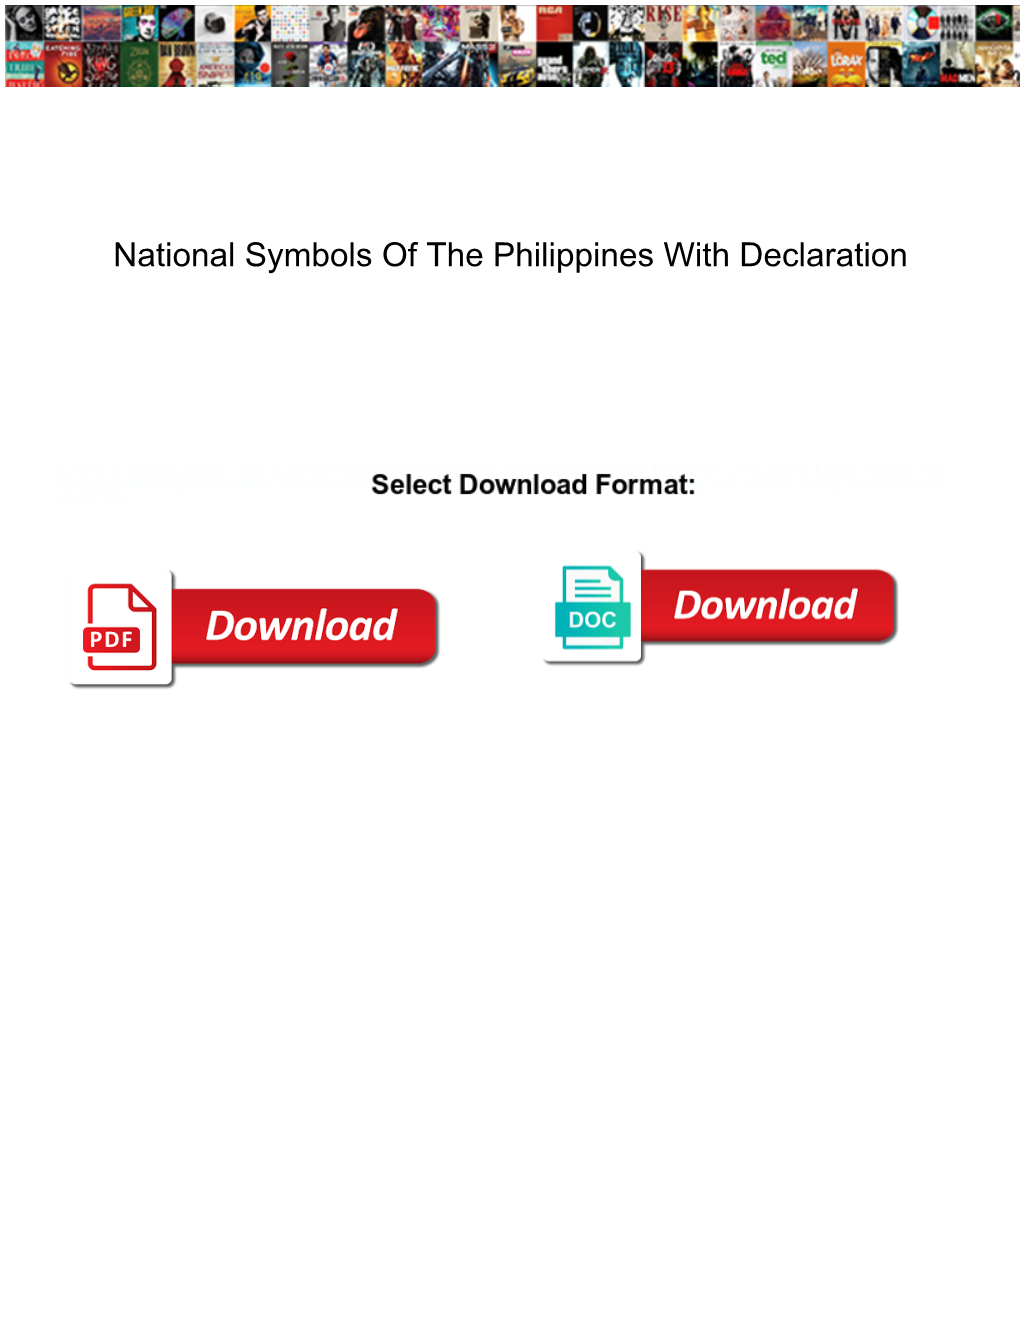 National Symbols of the Philippines with Declaration